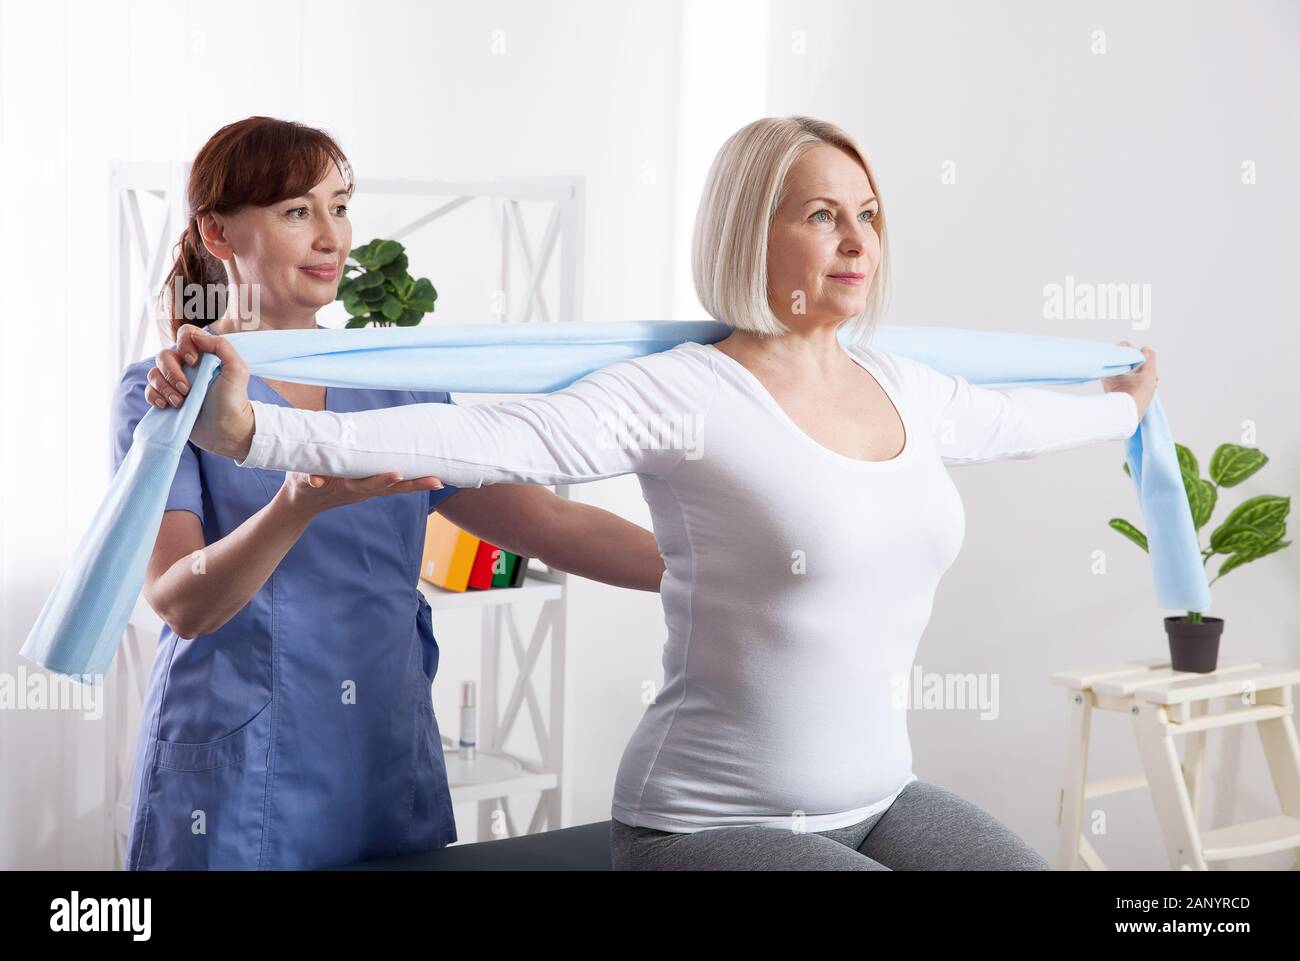 Physiotherapy, sport injury rehabilitation treatment with Resistance Band. Woman having chiropractic back adjustment. Osteopathy, Alternative medicine, pain relief concept. Front view. Stock Photo